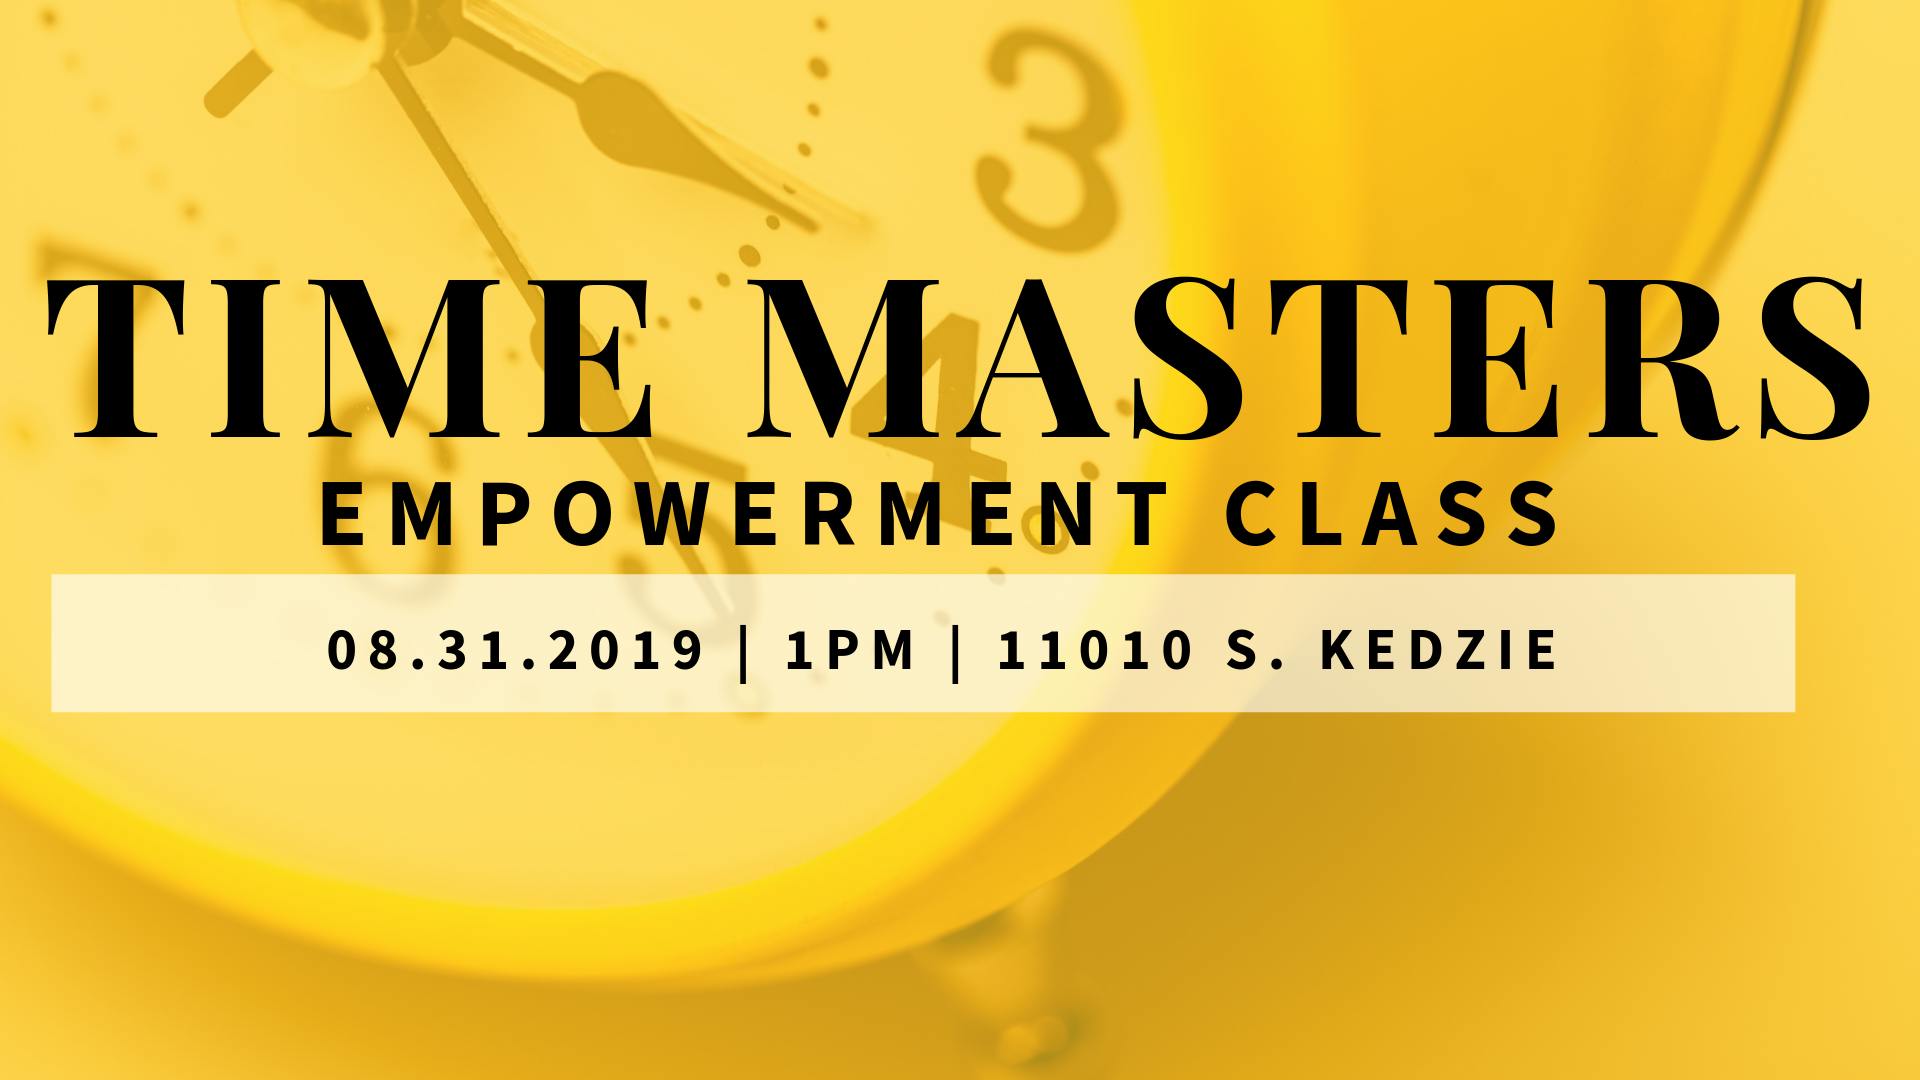 Time Masters Empowerment Class